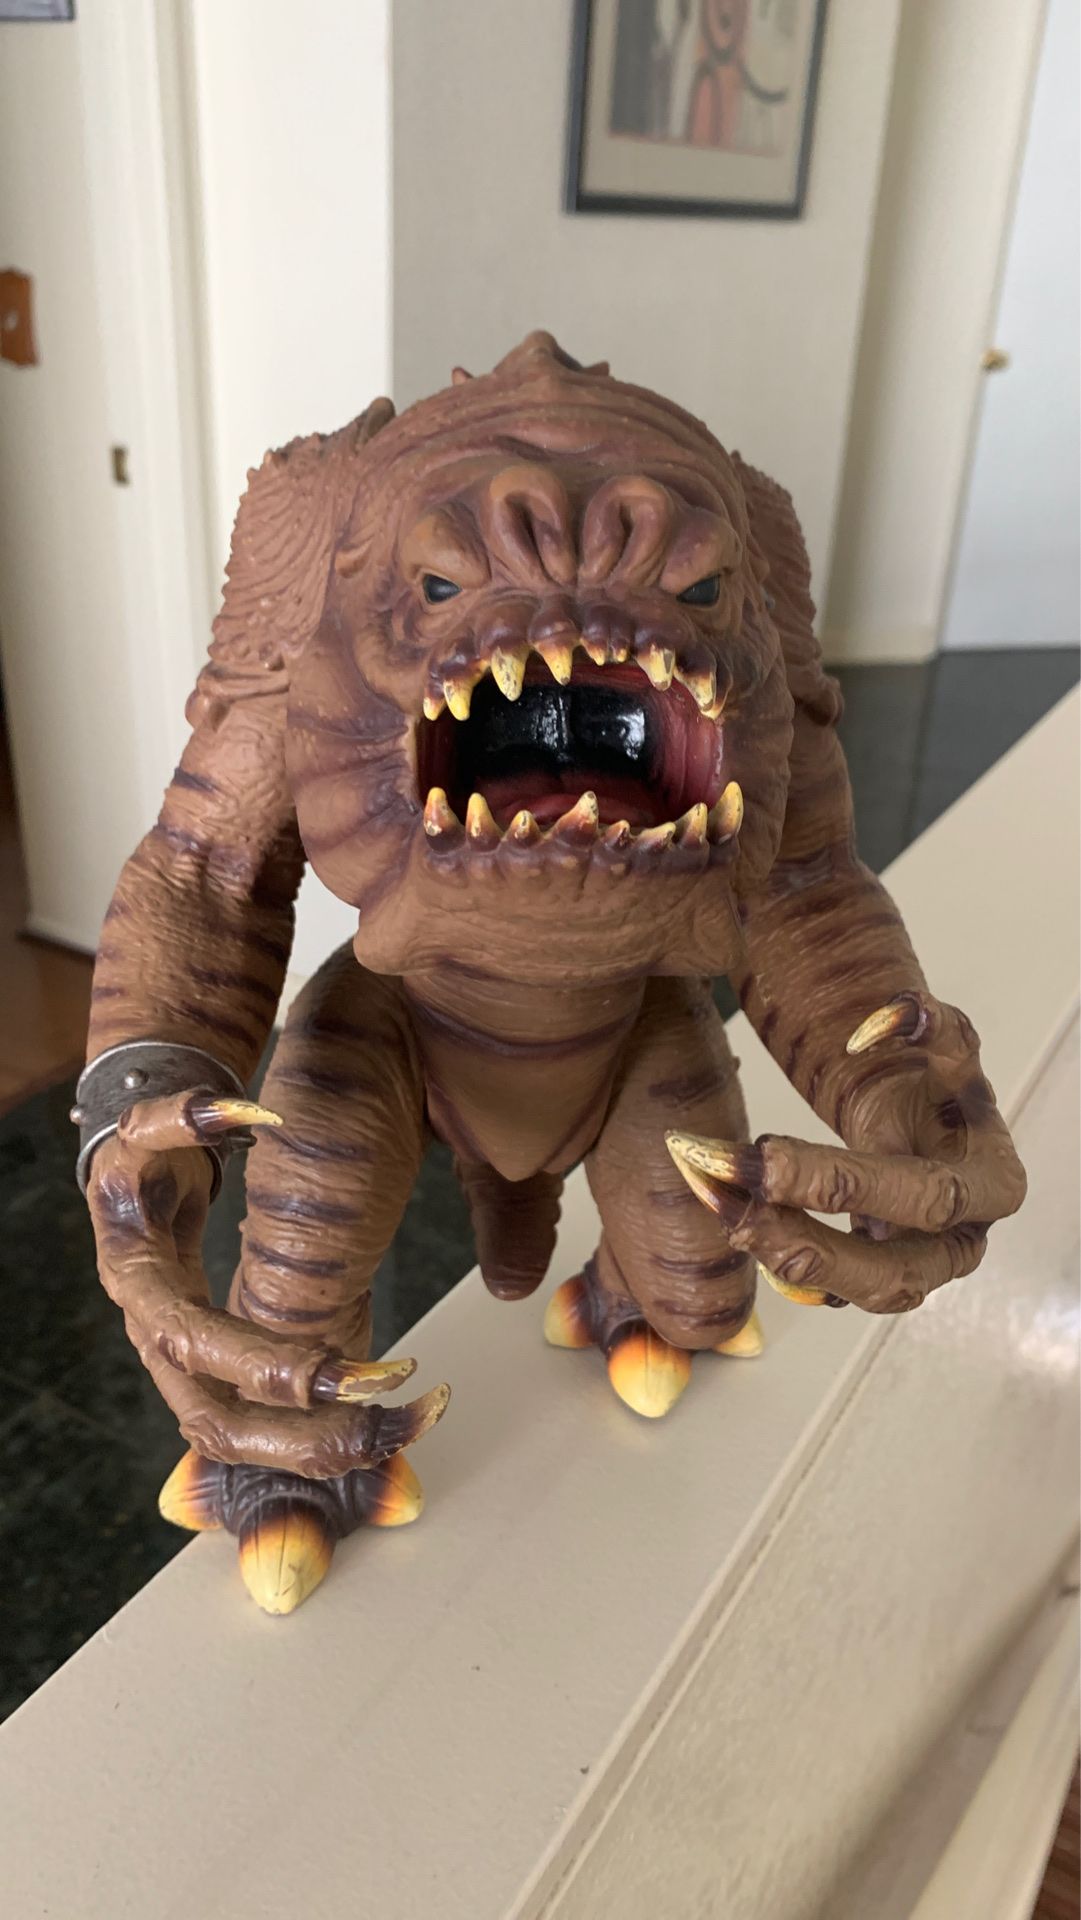 Star Wars: 1990s collectible Rancor action figure